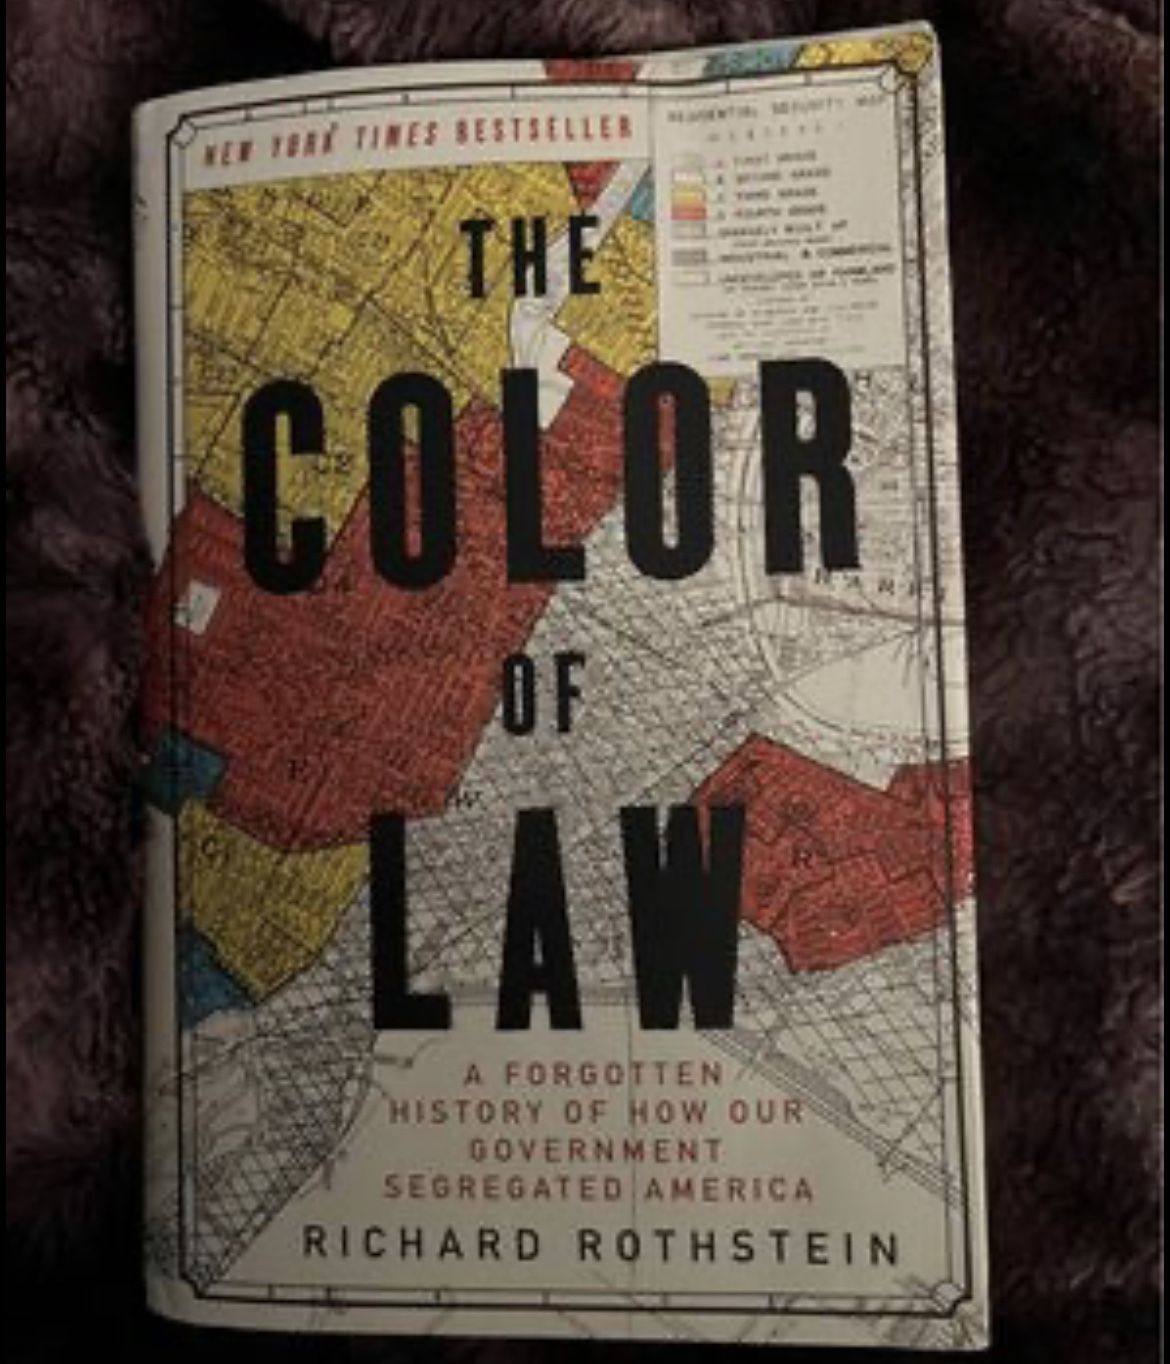 Book 📕 The Color Of Law, by Richard Rothstein